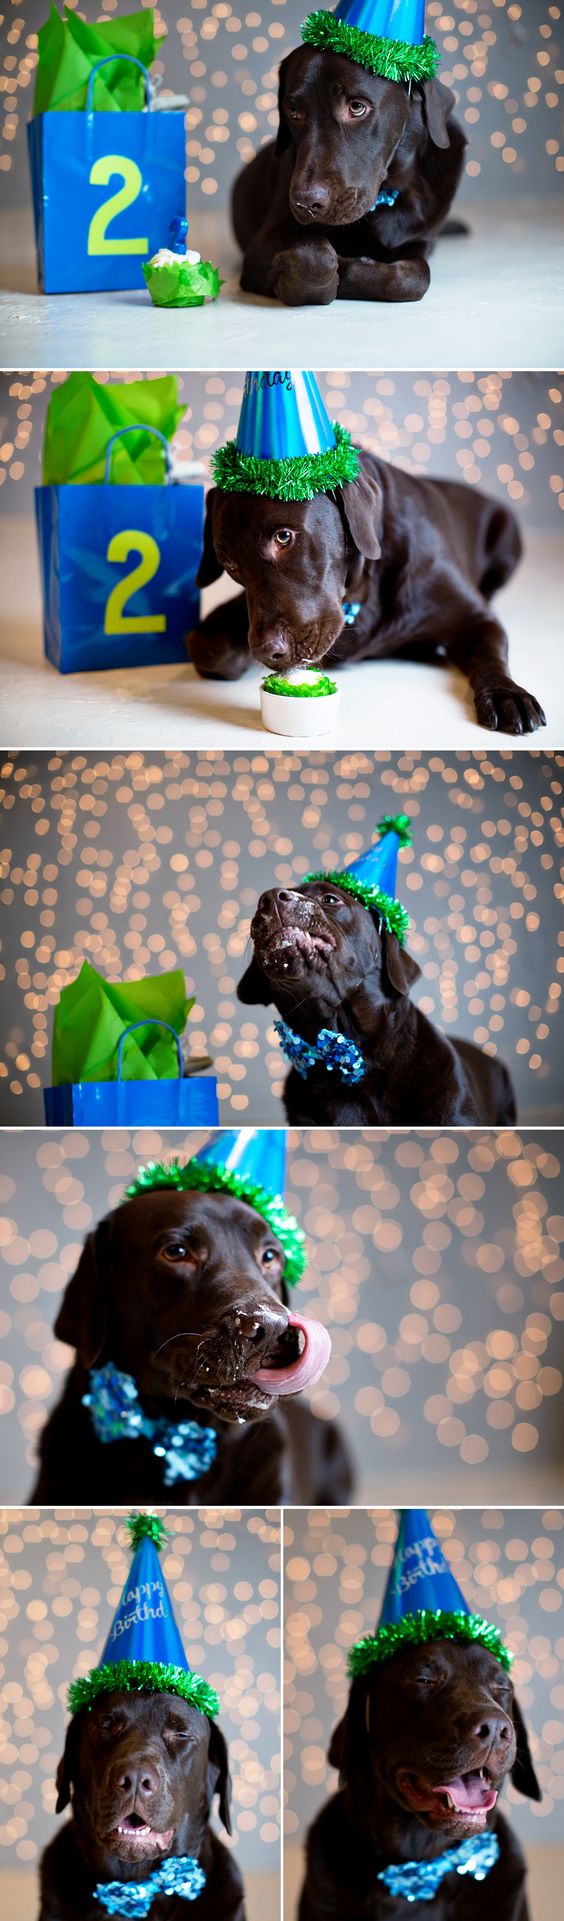 doggie birthday photo session PRECIOUS! I'll have to do this.